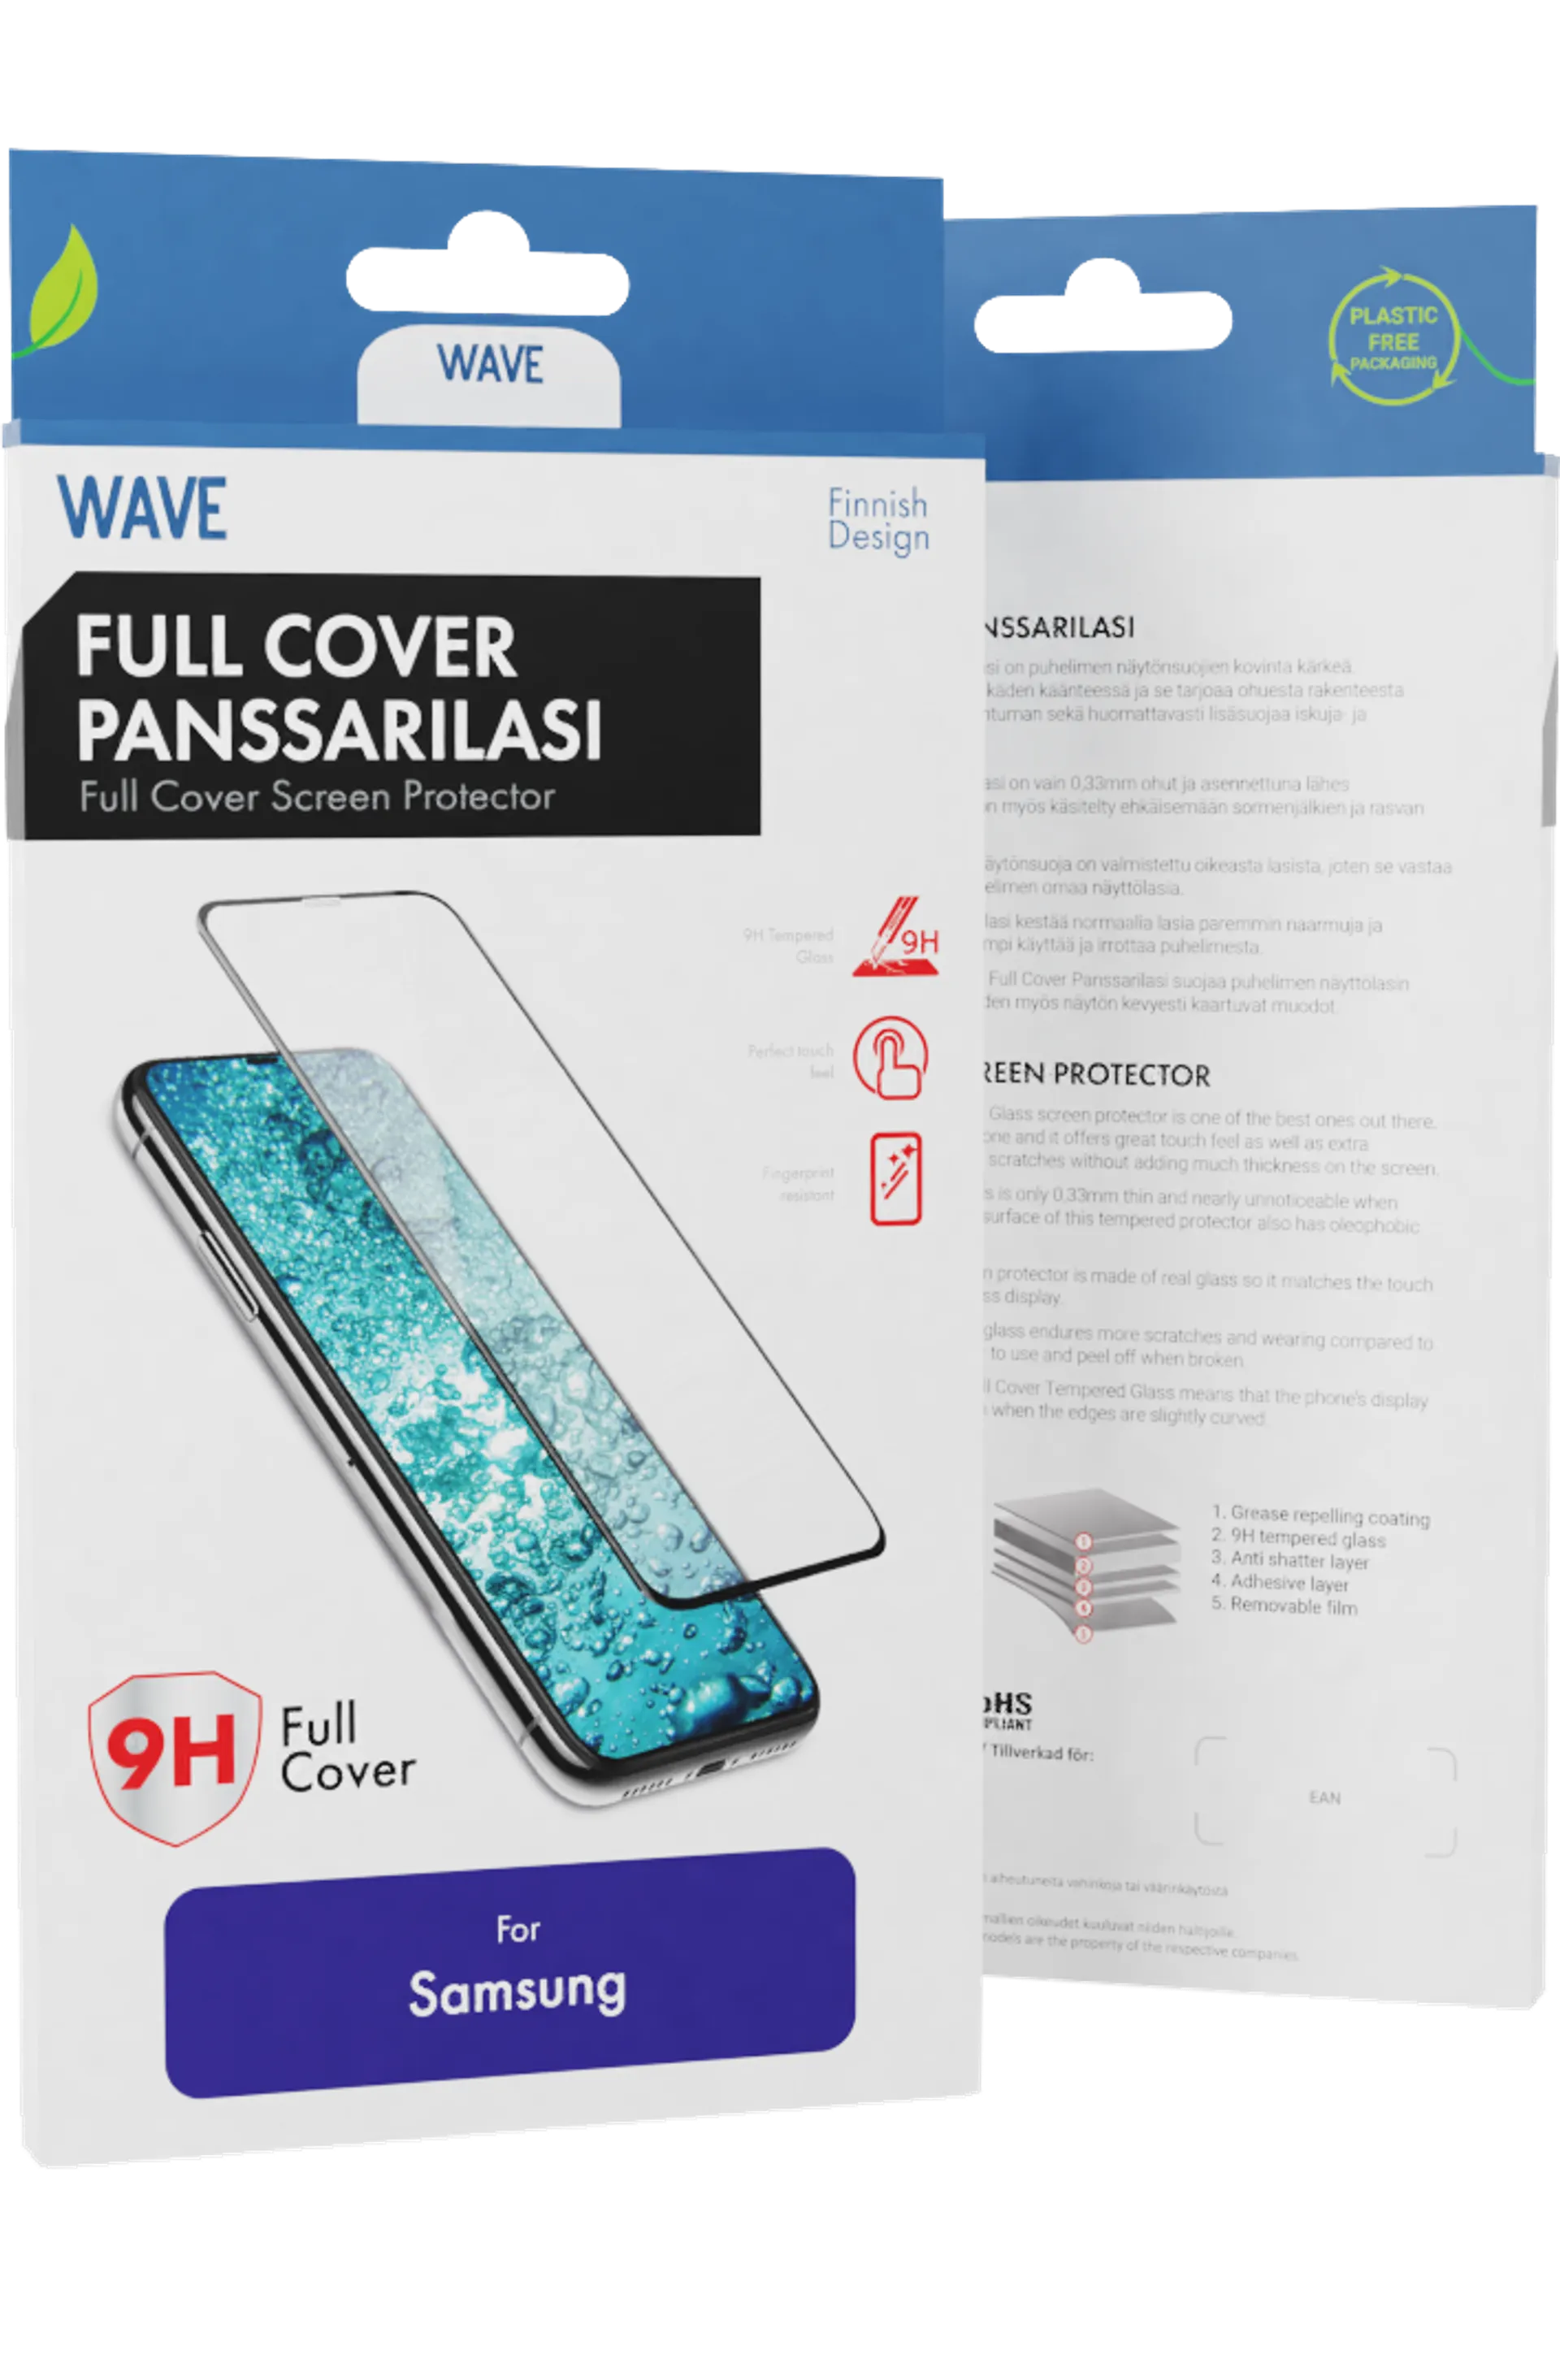 Wave Full Cover Panssarilasi, Samsung Galaxy A52s 5G / Samsung Galaxy A52 5G / Samsung Galaxy A52, Musta Kehys